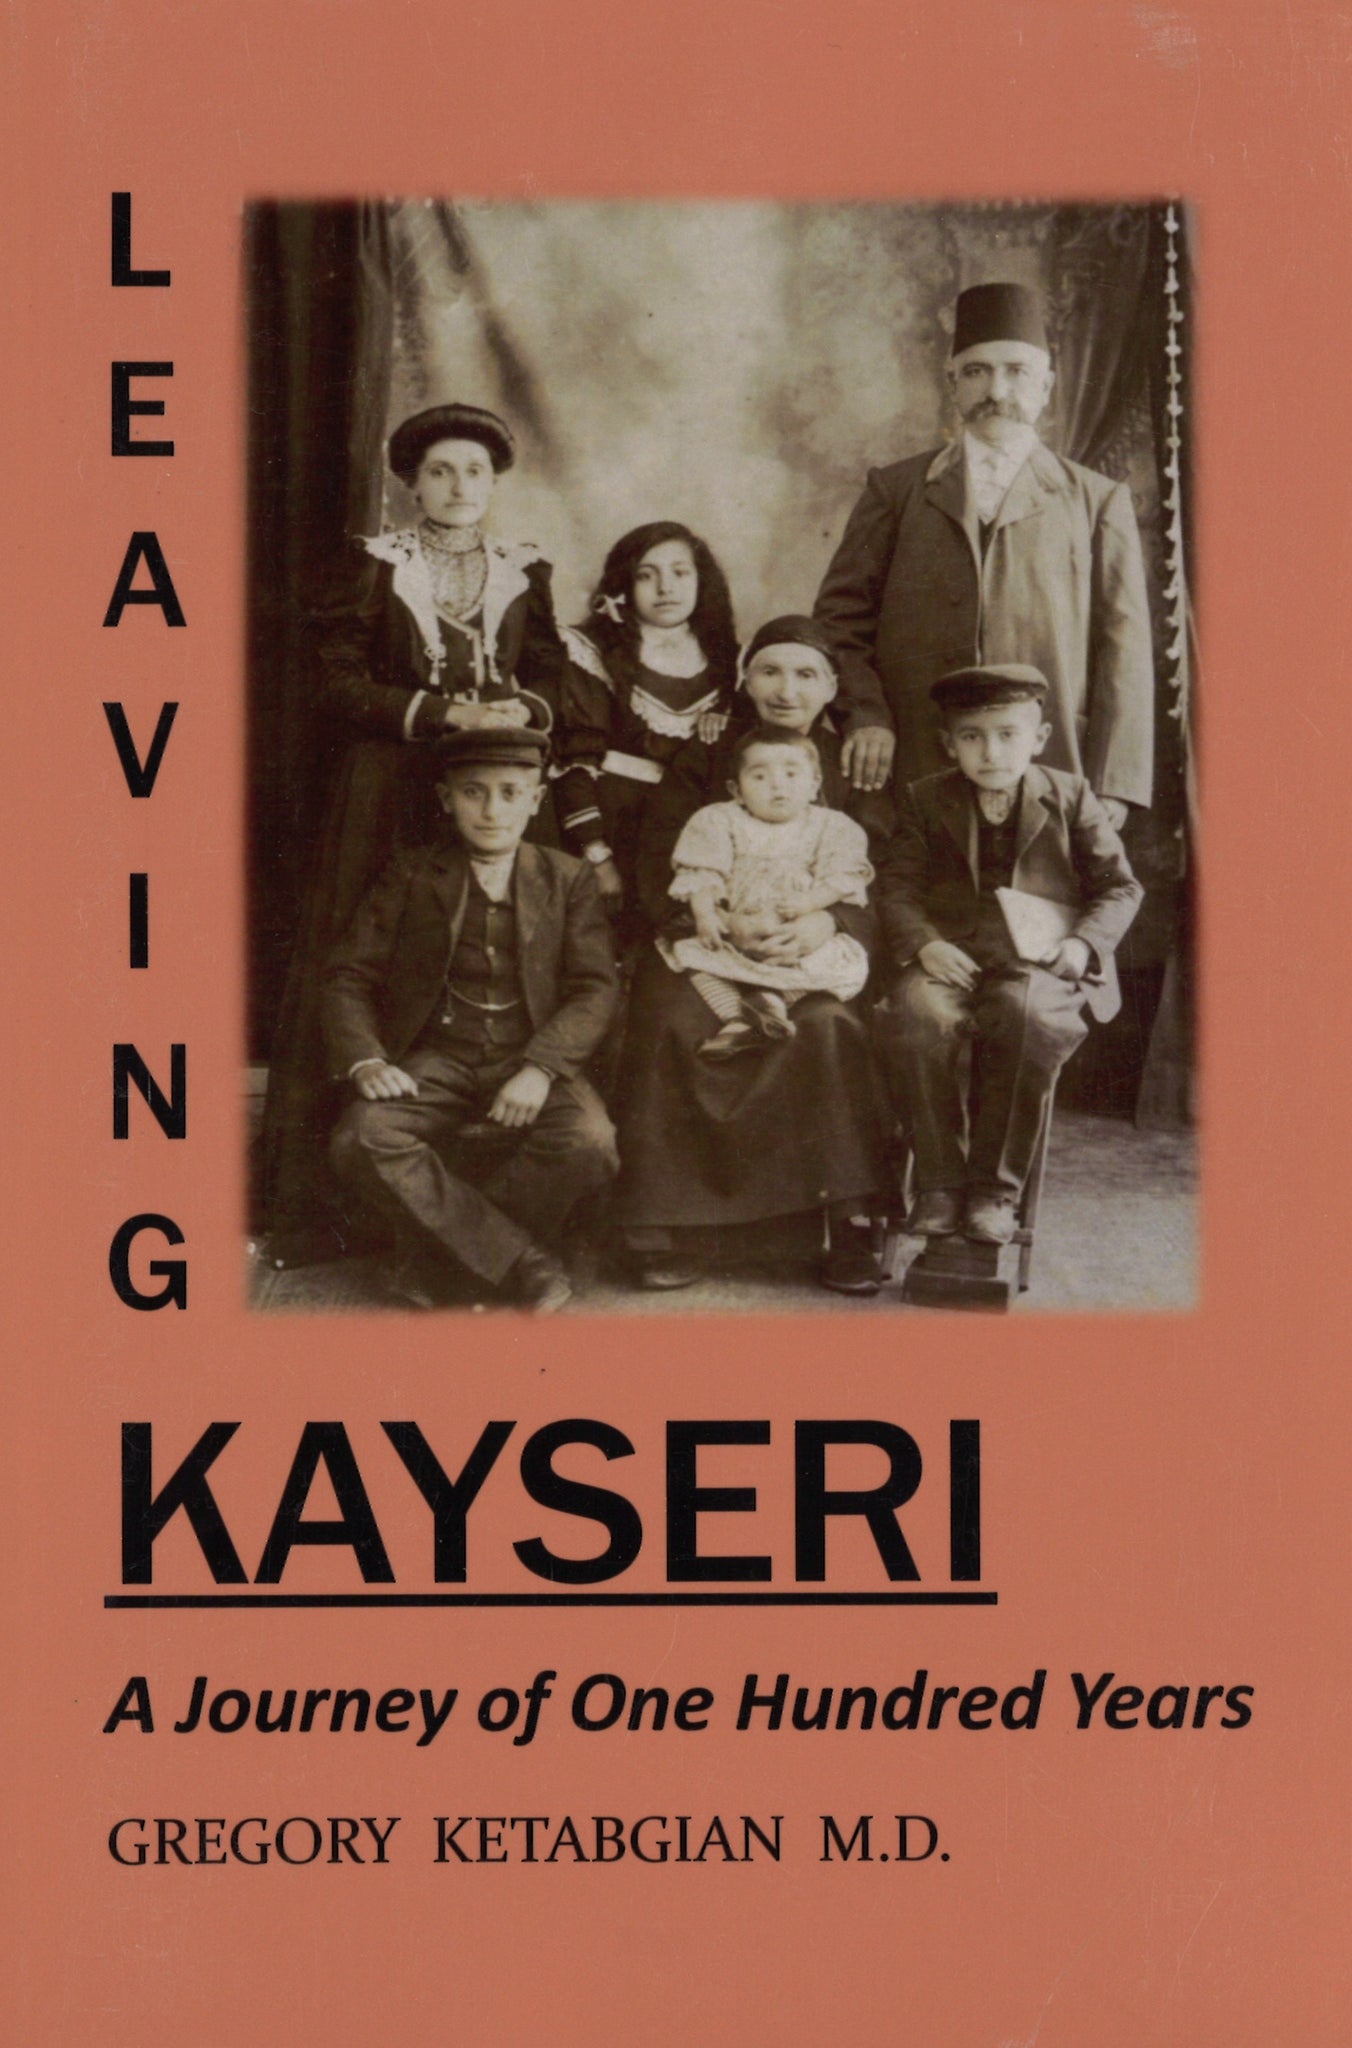 LEAVING KAYSERI: A Journey of One Hundred Years